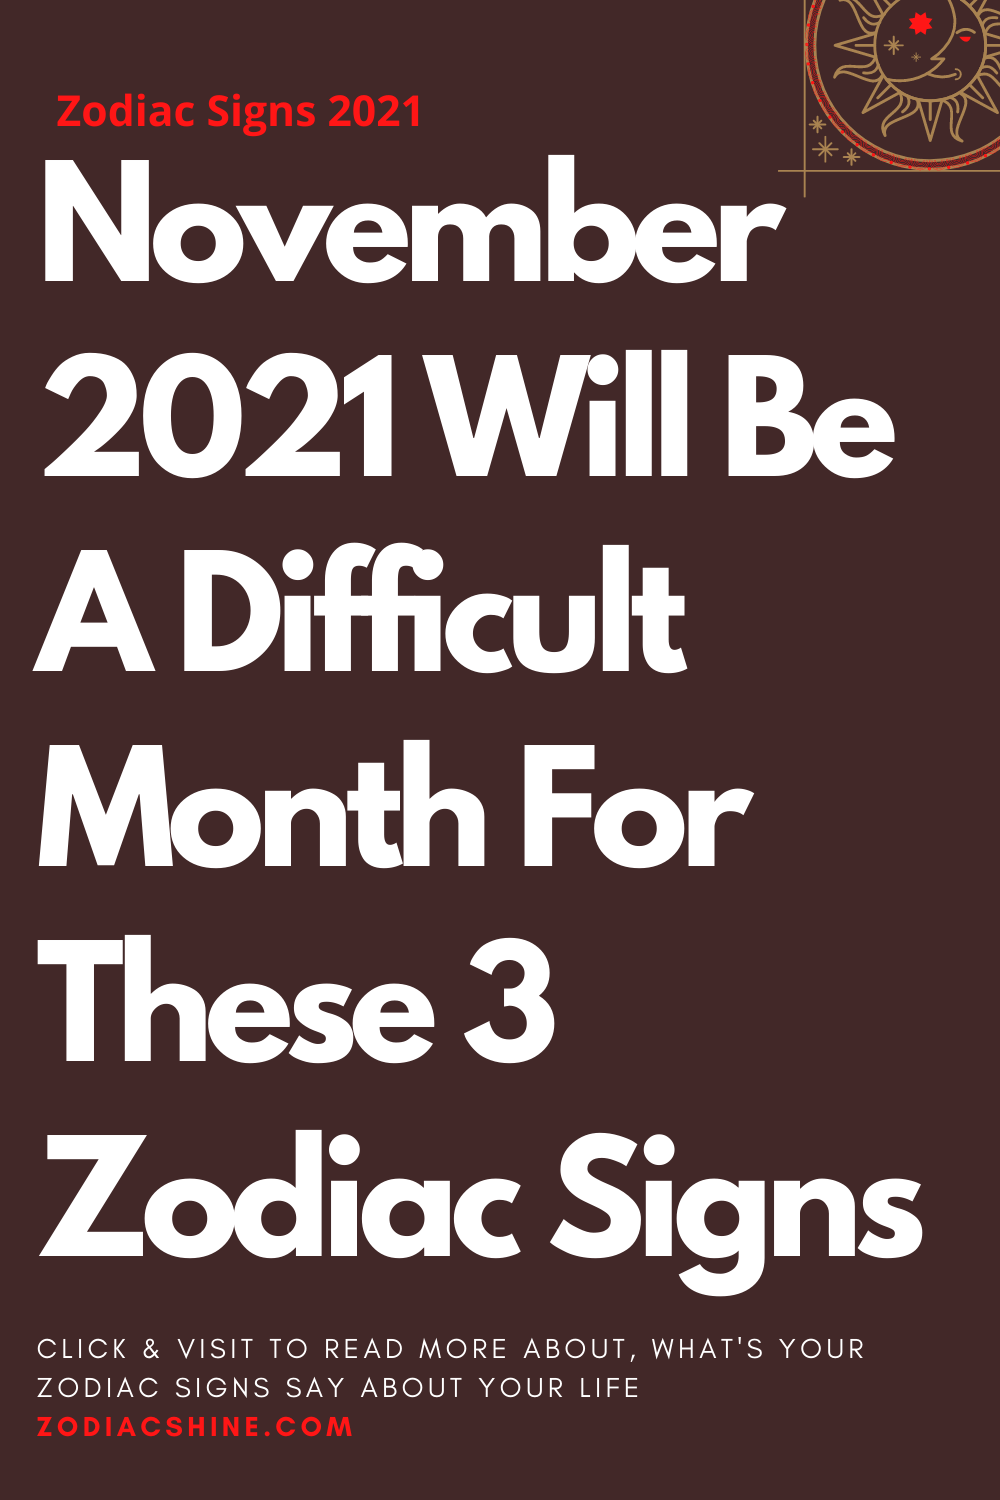 November 2021 Will Be A Difficult Month For These 3 Zodiac Signs